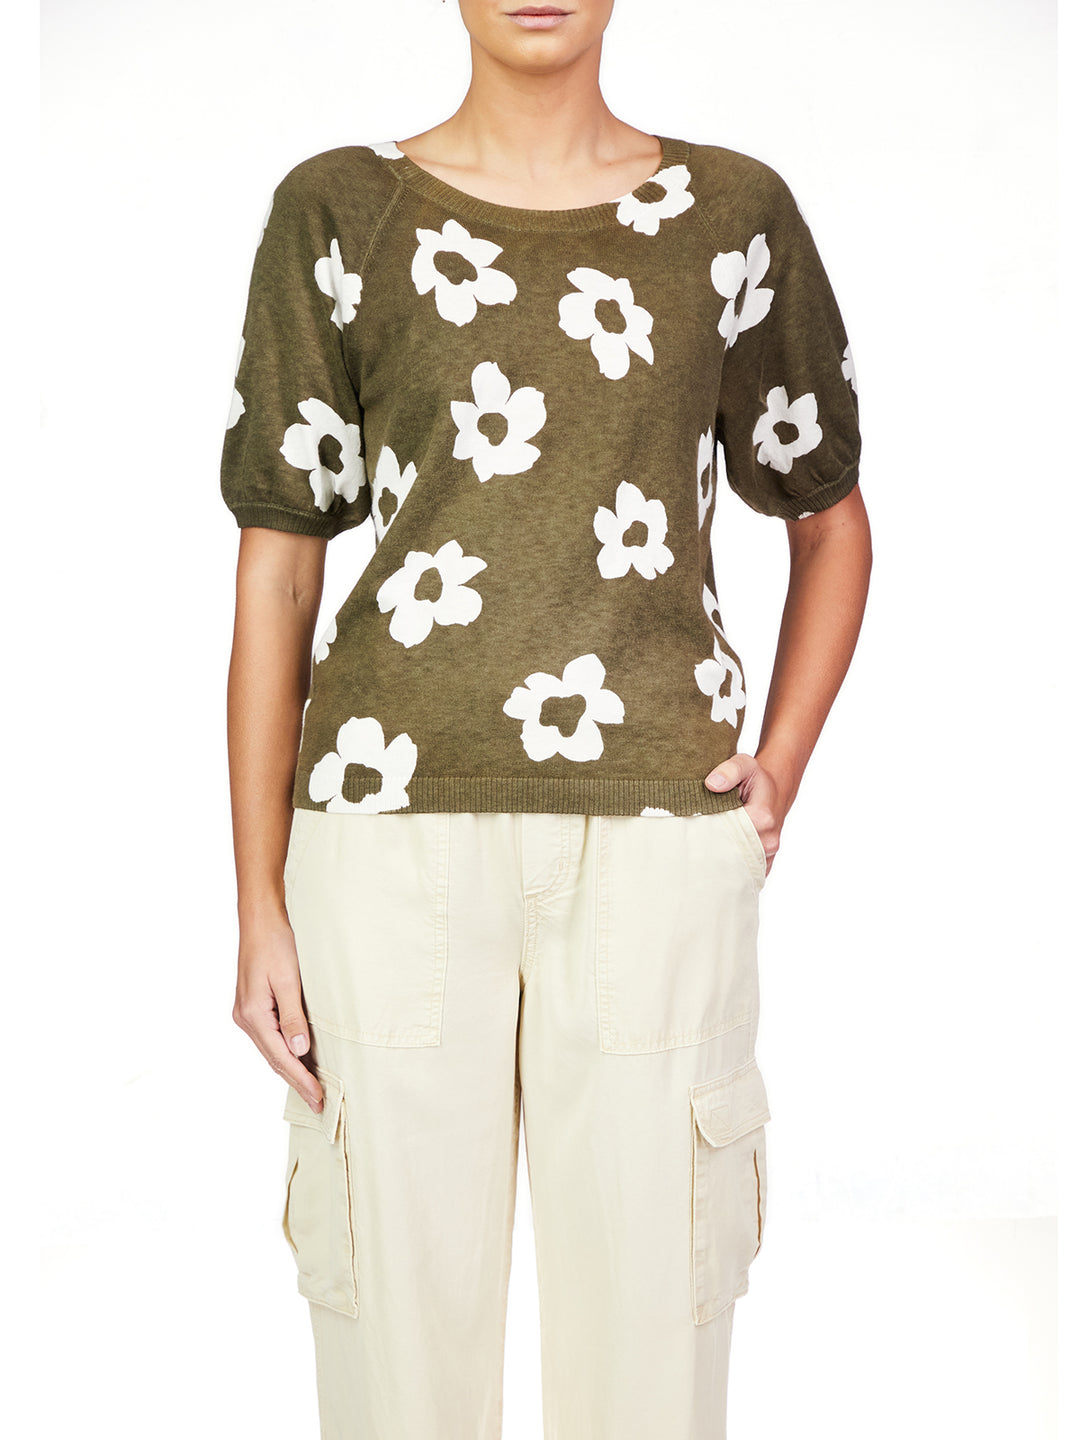 SUNNY DAYS SWEATER-BURNT OLIVE POP - Kingfisher Road - Online Boutique